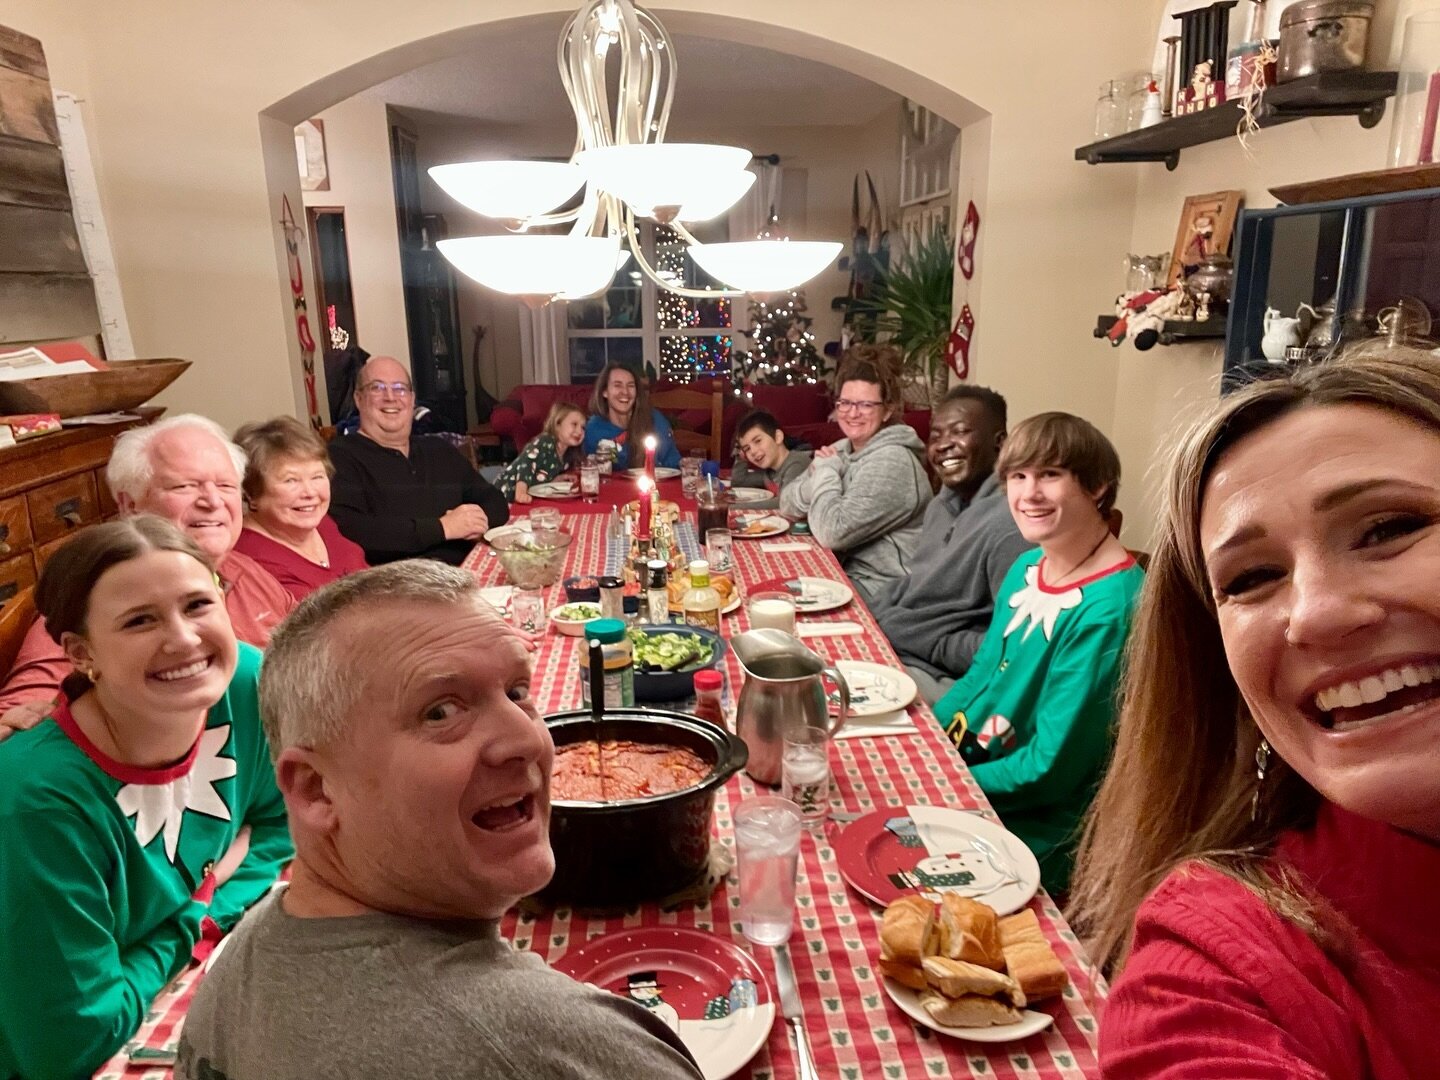 From our Christmas Eve table to yours. ❤️🎄

#lasagna #tradition